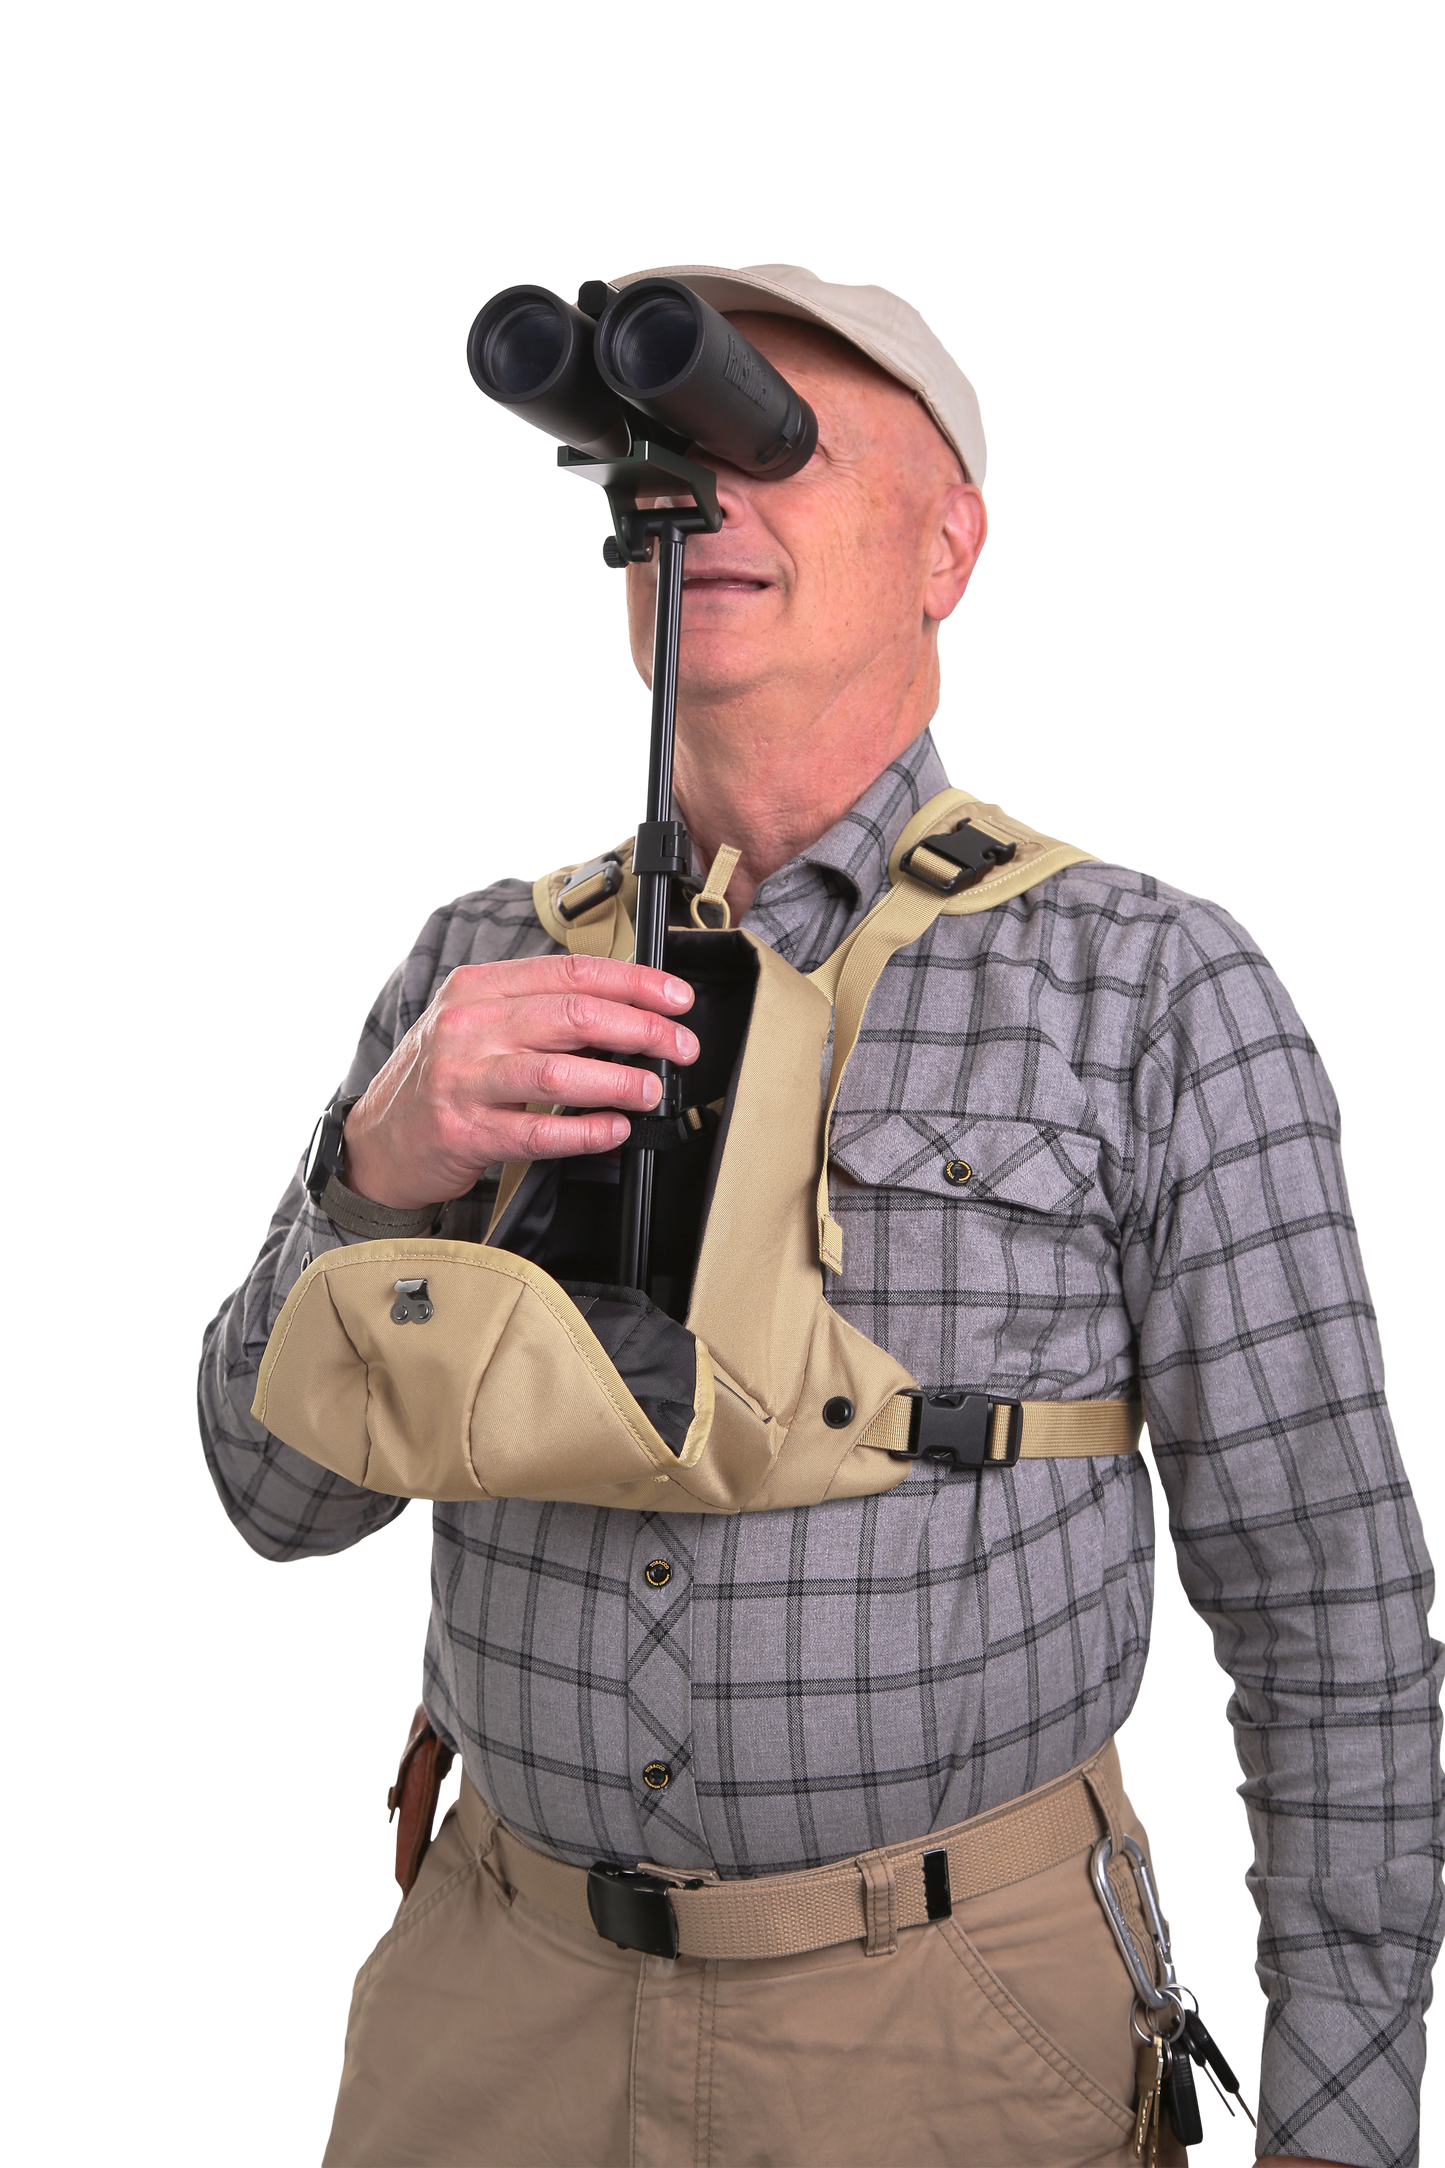 Stabil-Eyes™ Binocular Sighting System™ for hands-free, fatigue free glassing